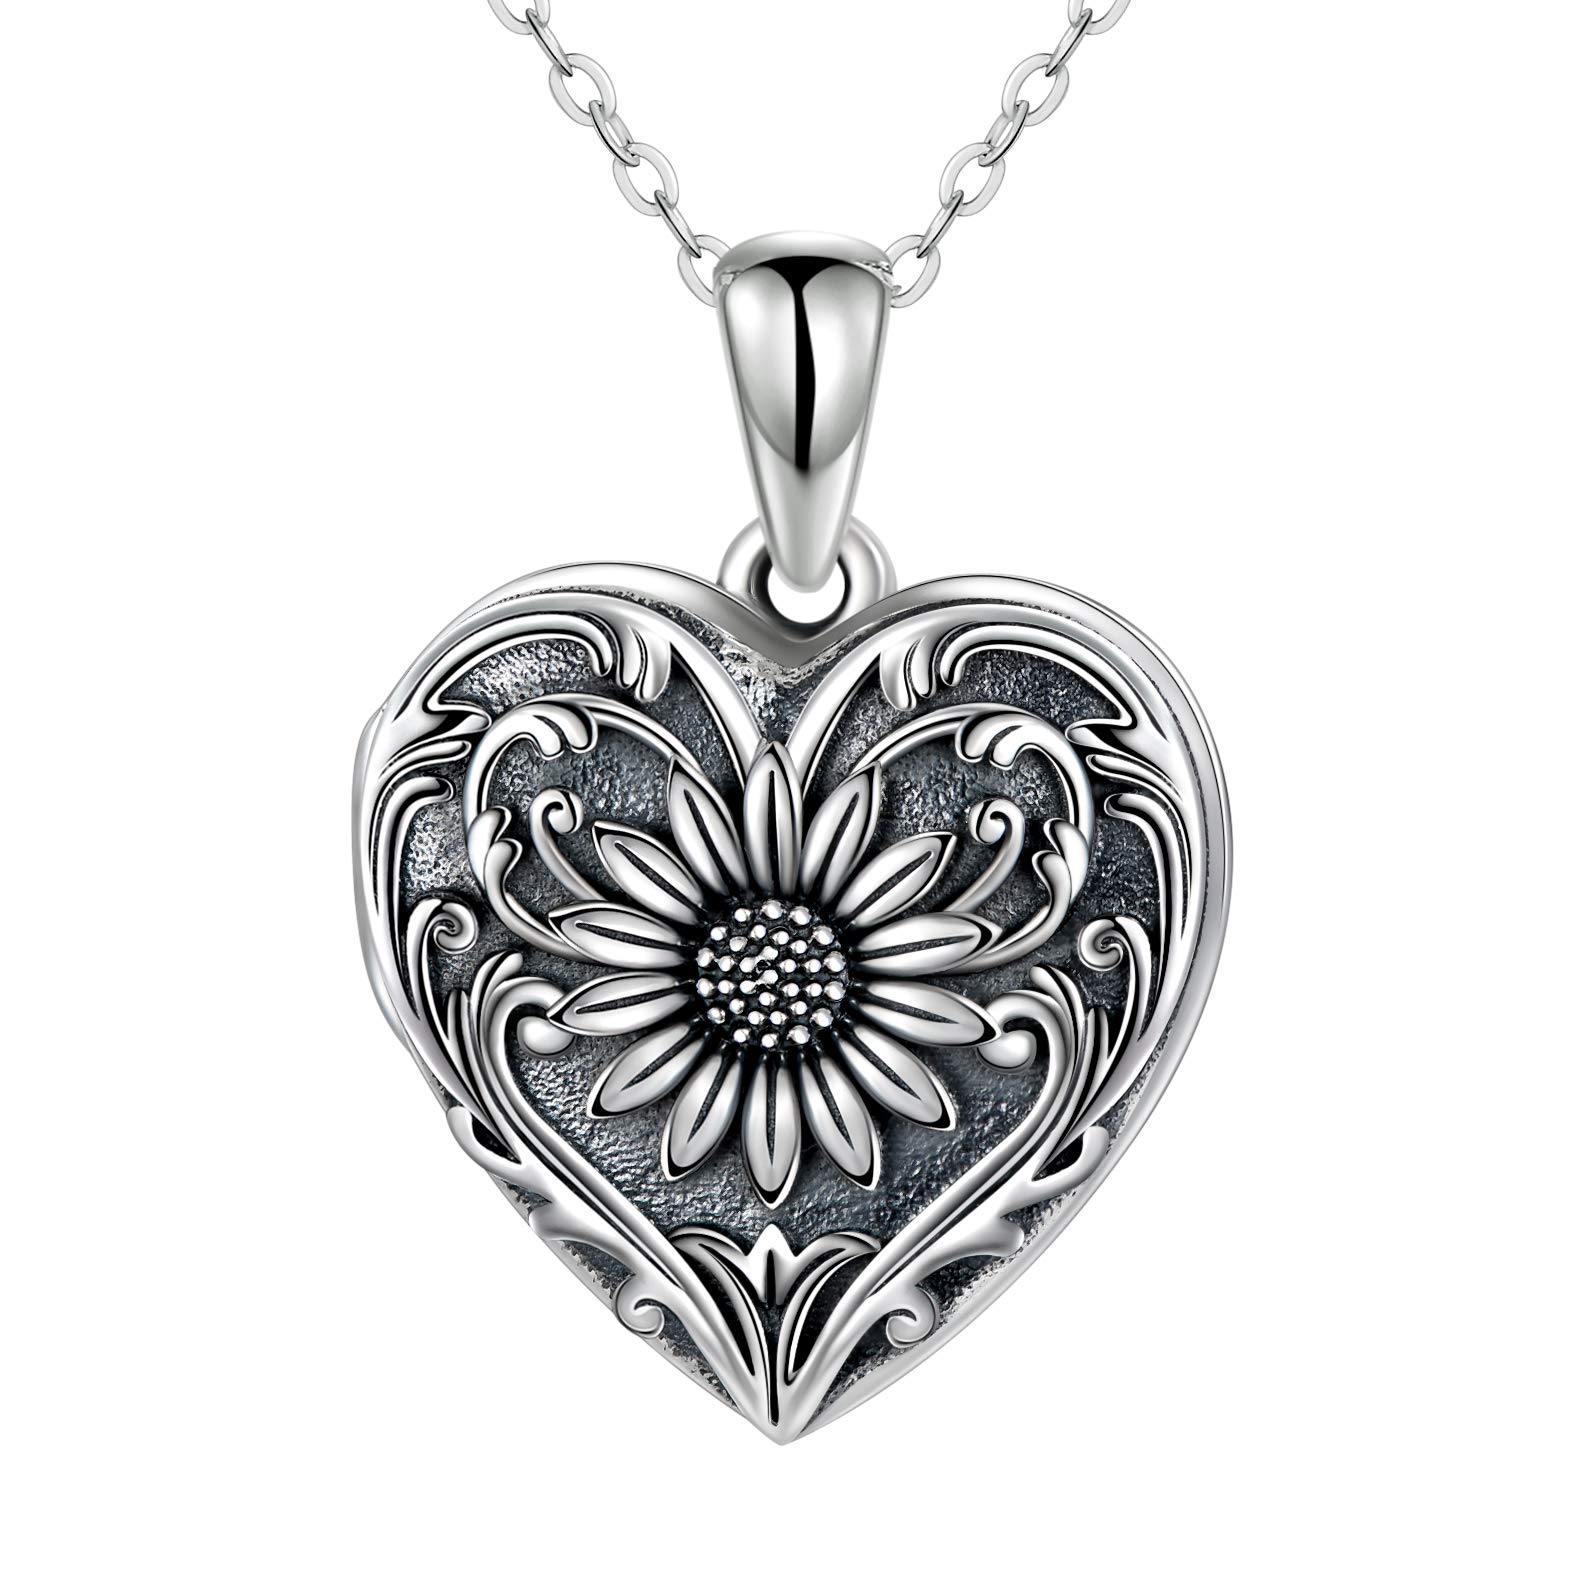 SOULMEET Sunflower Heart Shaped Locket Necklace That Holds Pictures Photo Keep Someone Near to You Sterling Silver/Gold Custom Jewelry Personalized Locket Necklace